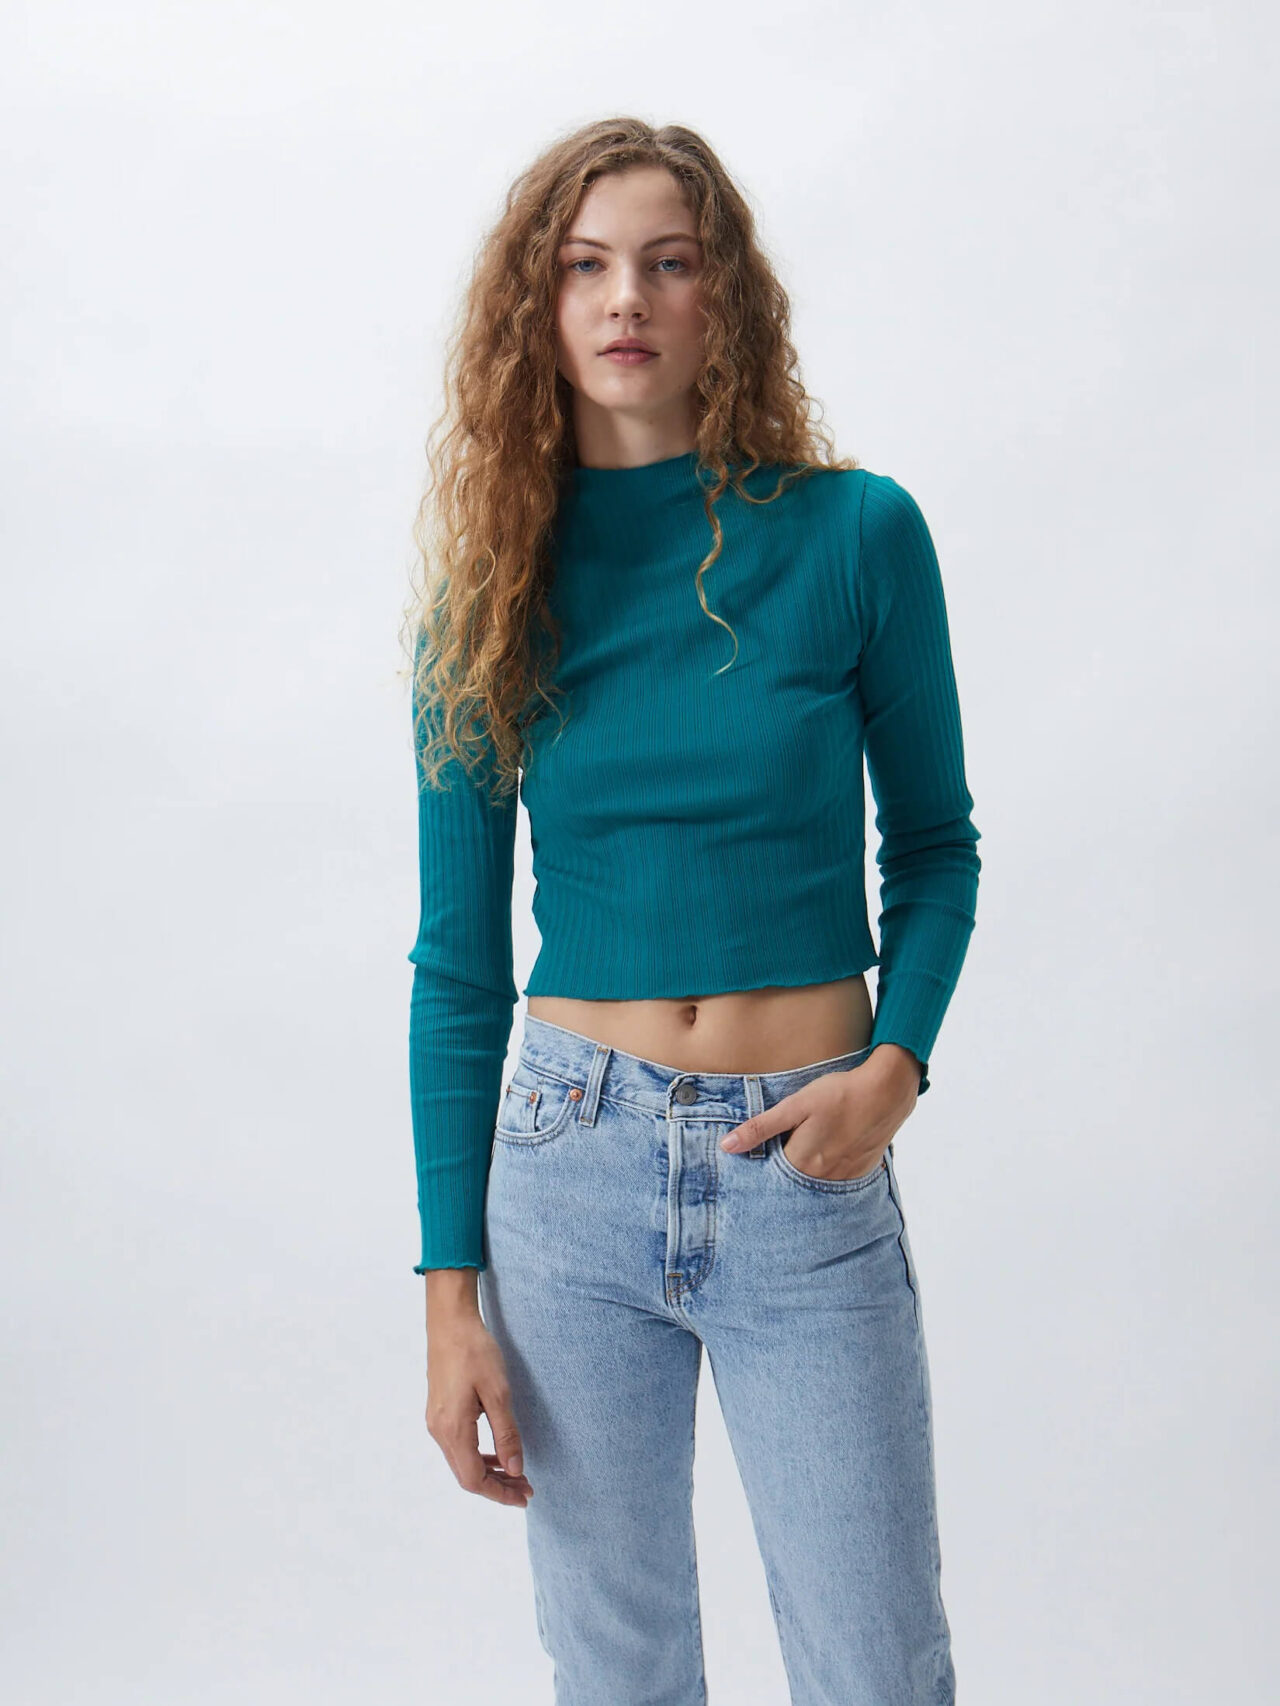 11 Best Affordable Clothing Brands For Sustainable Fashion - The Good Trade